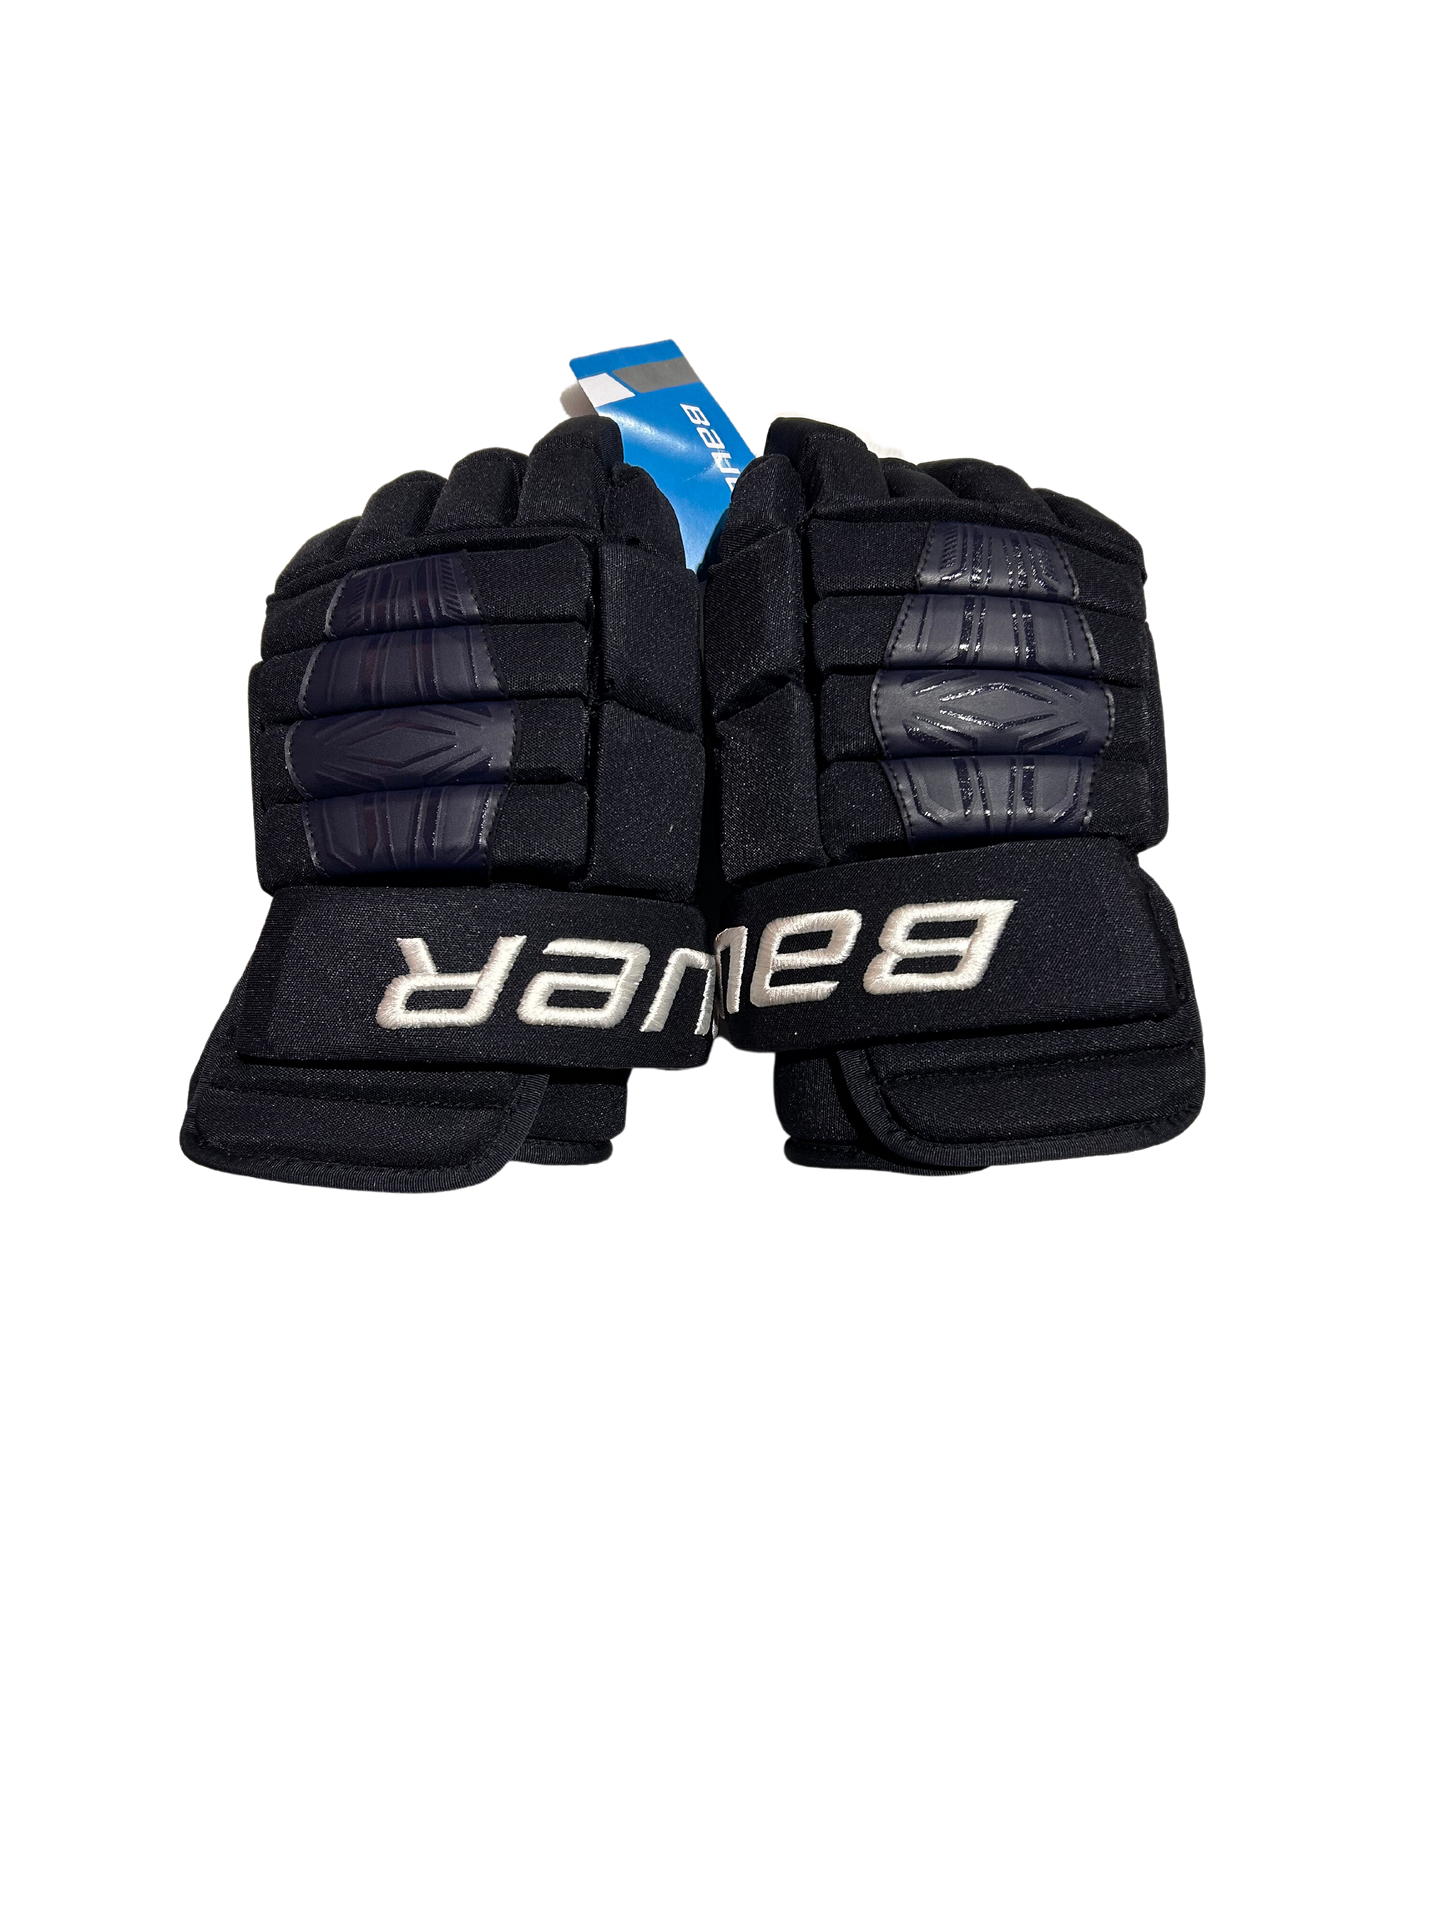 New Navy Team Issued Colorado Avalanche Bauer Pro Series Gloves (Multiple Sizes)